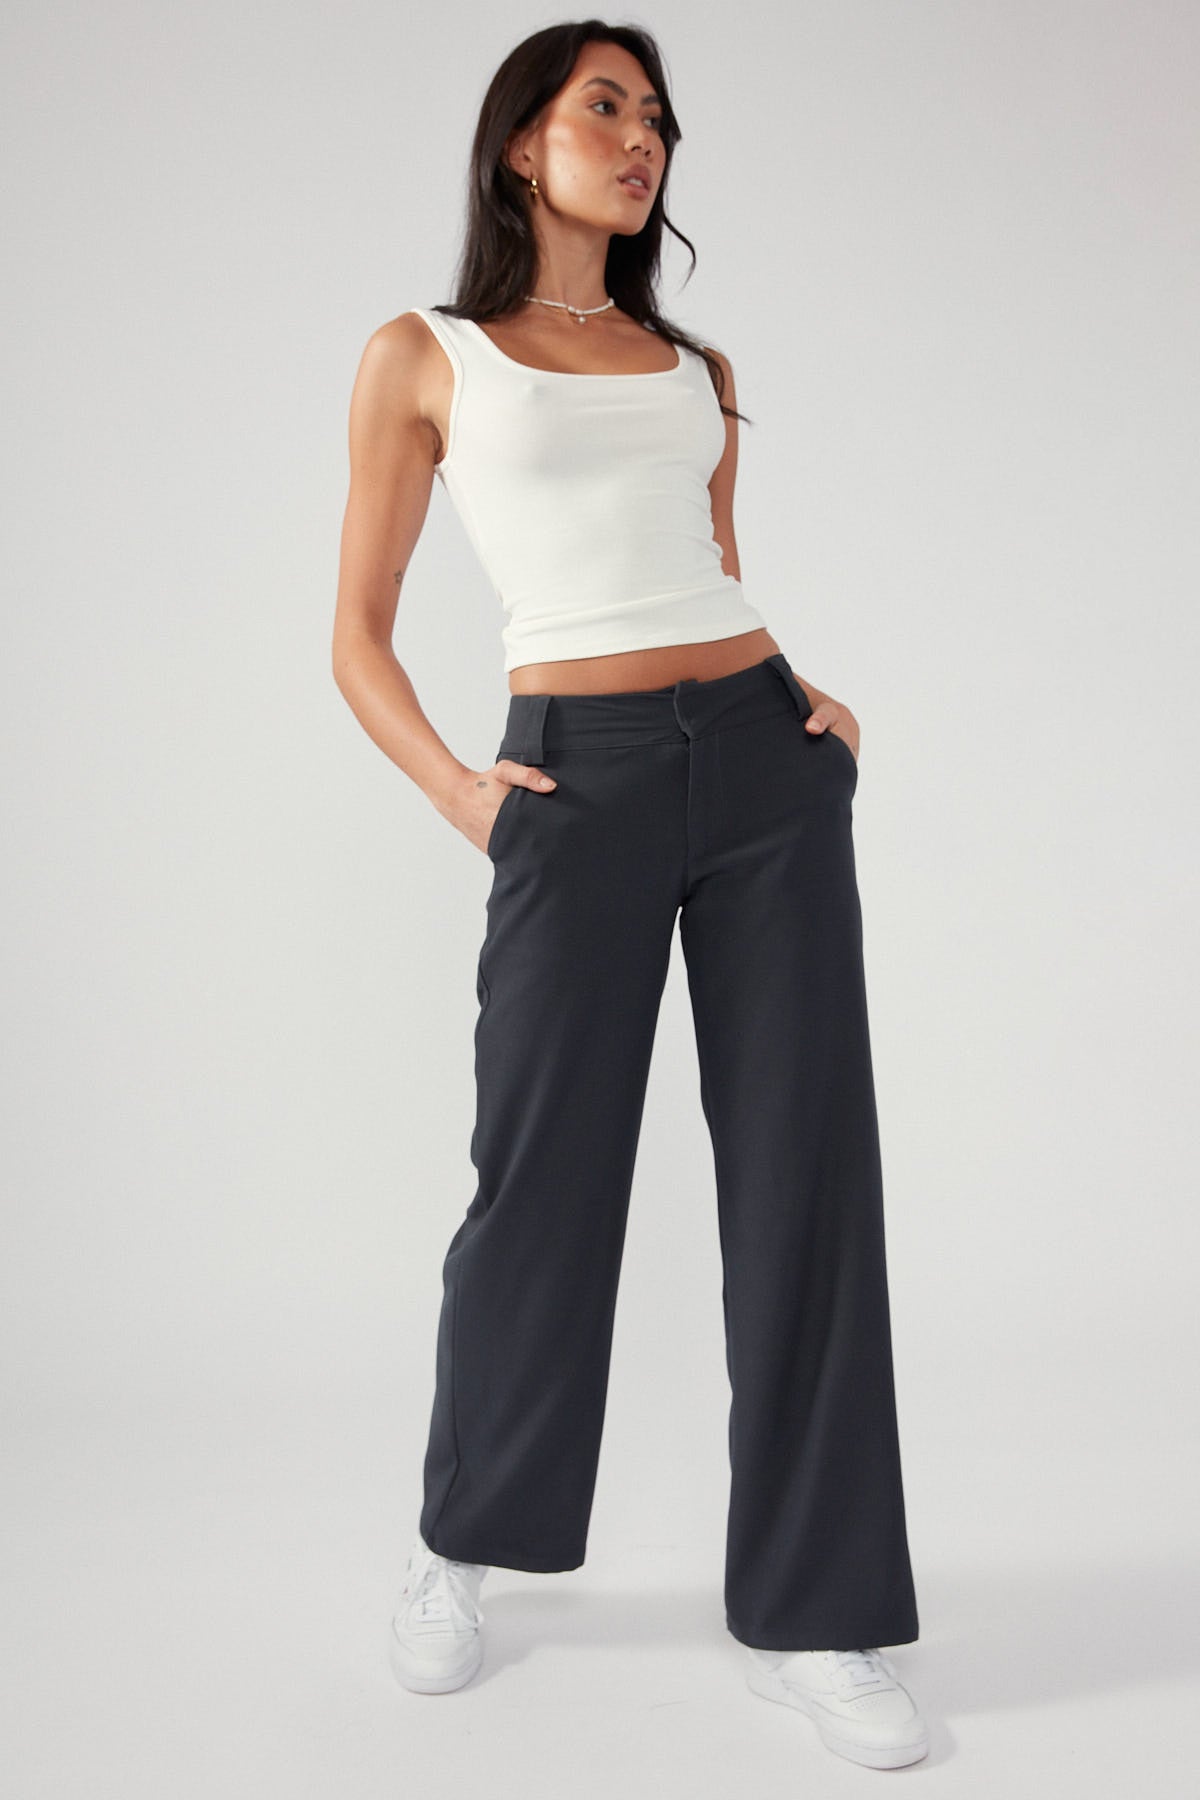 Topshop Tall relaxed low slung cargo pants in khaki | ASOS